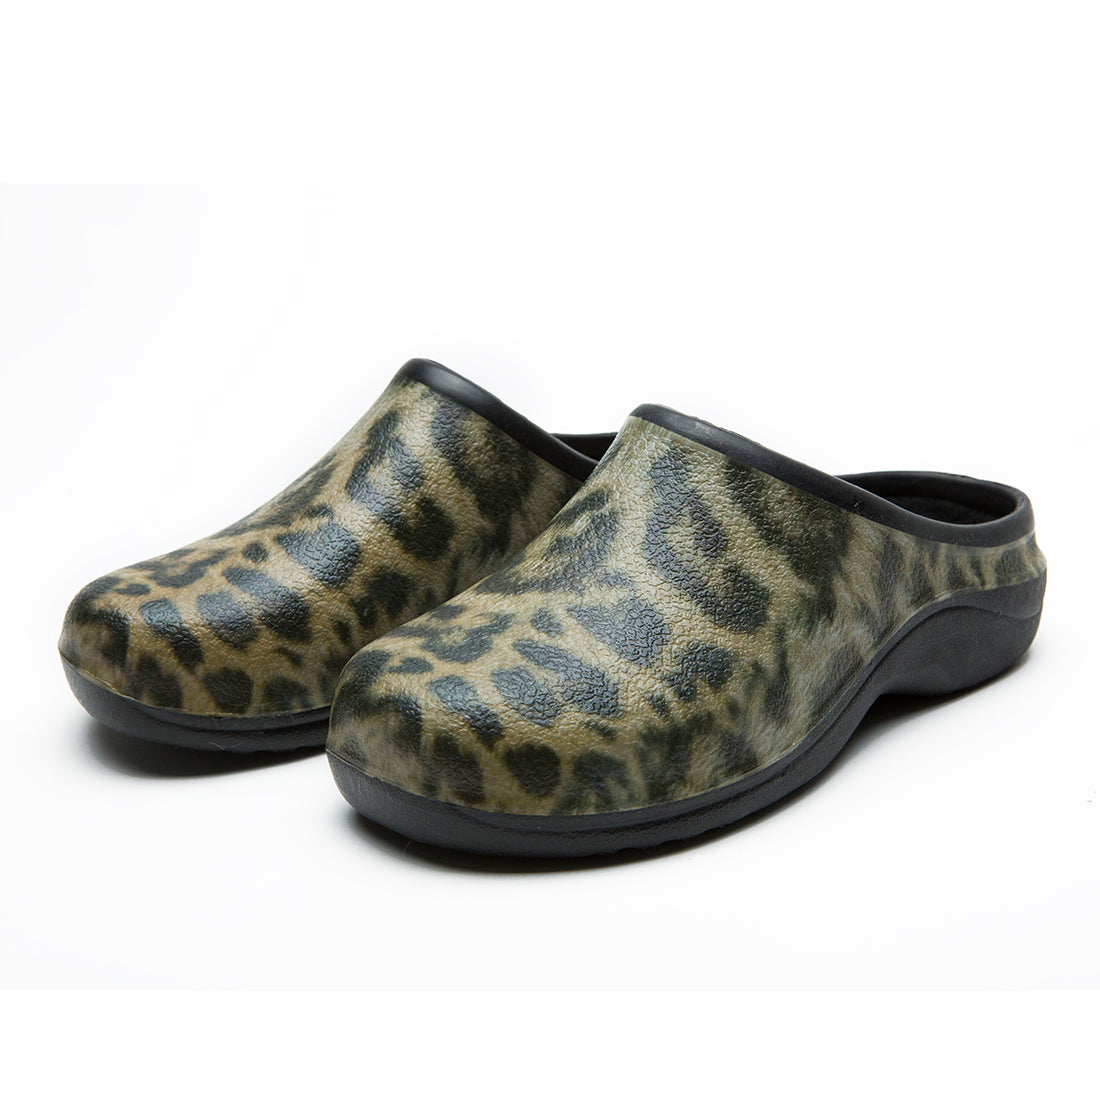 Leopard Garden Clogs Backdoorshoes® - CLEARANCE available in UK sizes 4,5 & 7 only